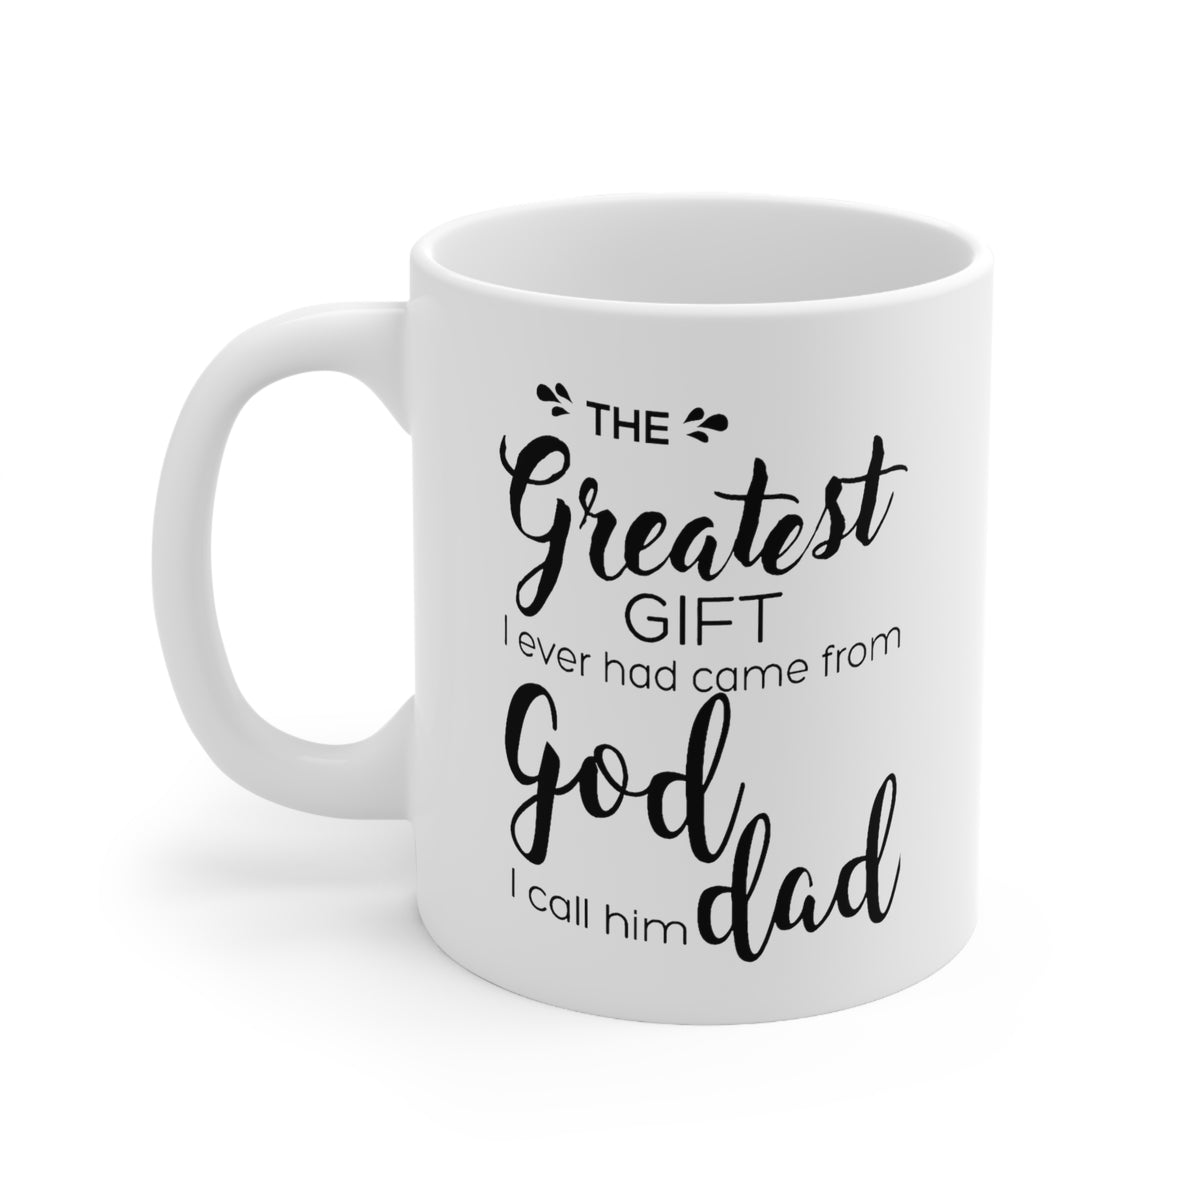 Father's Day Gifts - The Greatest Gift I Ever Had Came From God, I Call Him Dad White Coffee Mug, Tea Cup